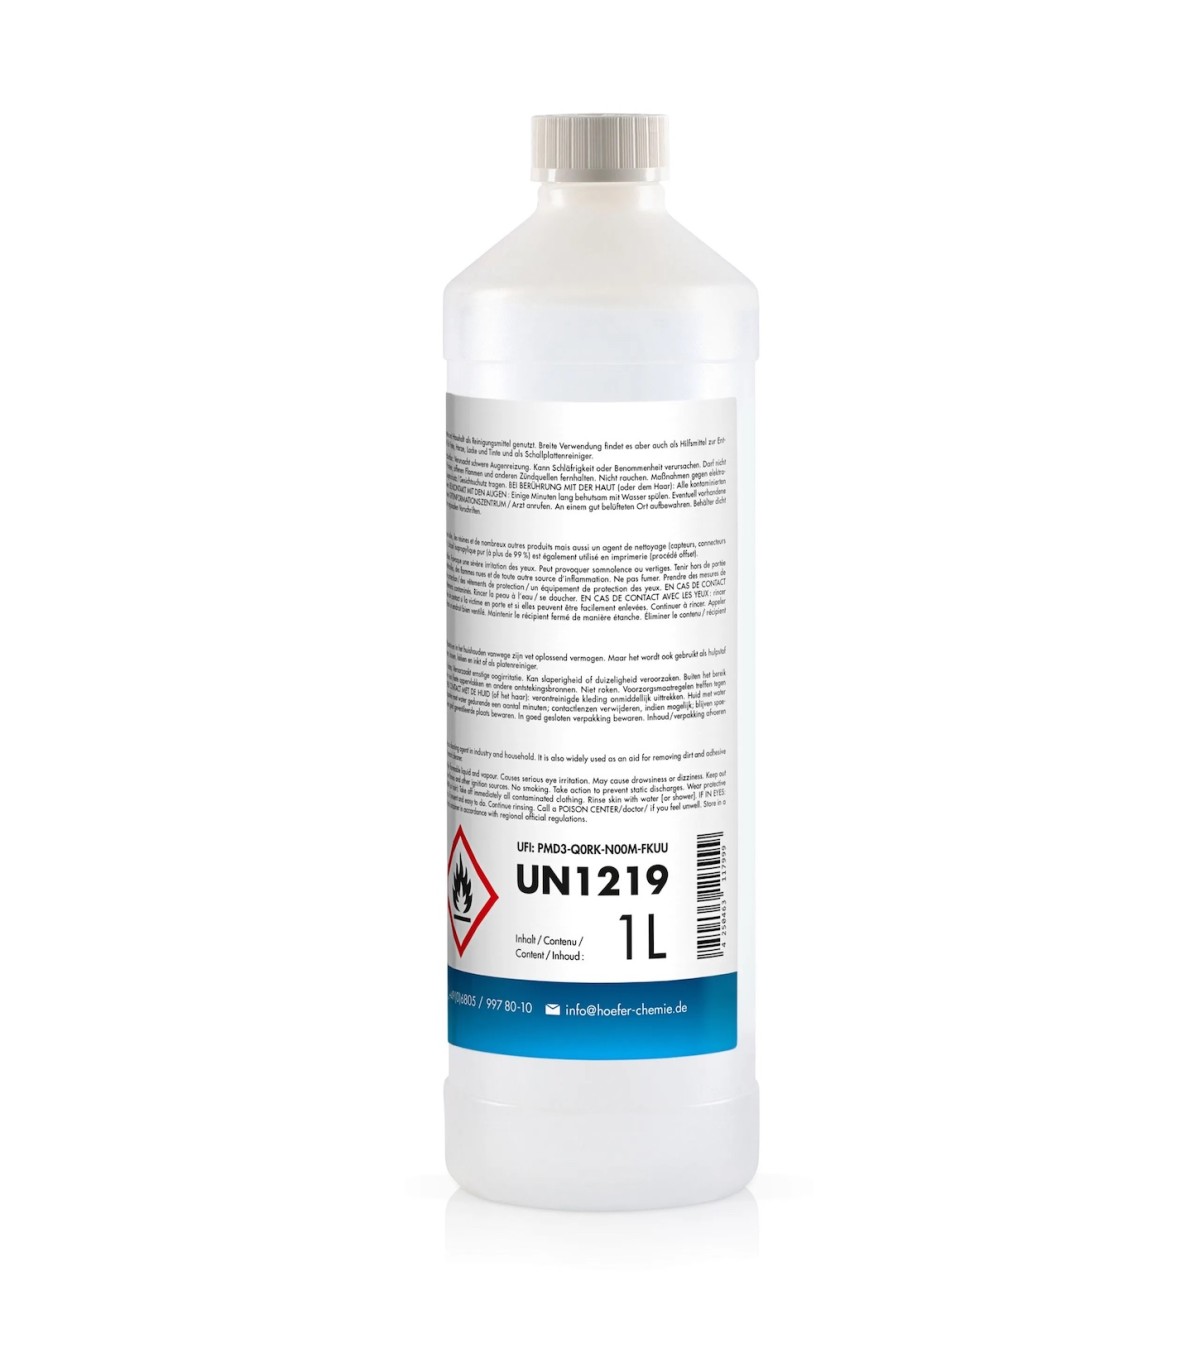 Vente alcool isopropylique 99.9% 1L à Nice - IPA Cleaner isopropanol Nice